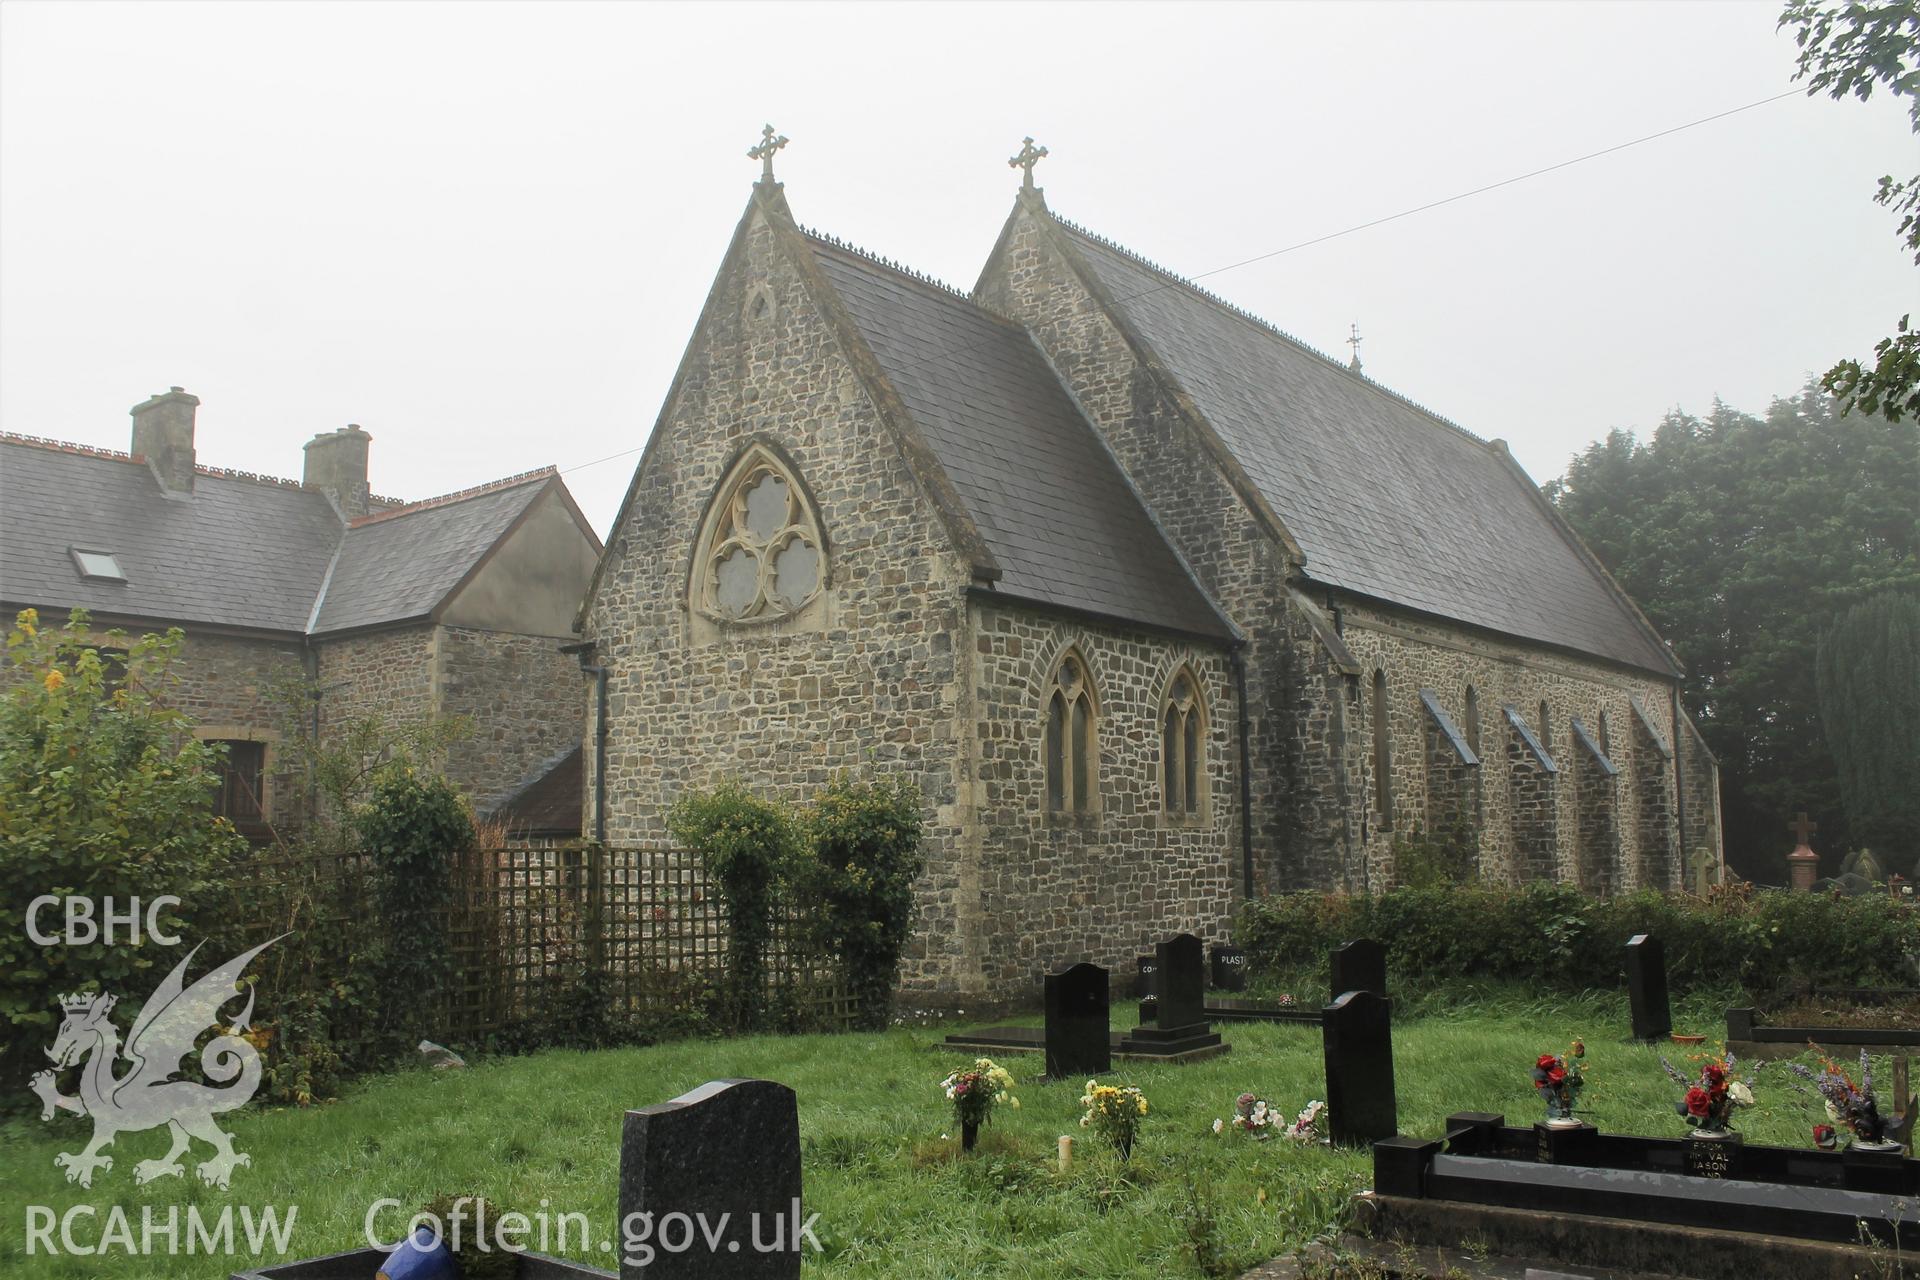 Digital colour photograph showing exterior of St Mary's Catholic church, Carmarthen.